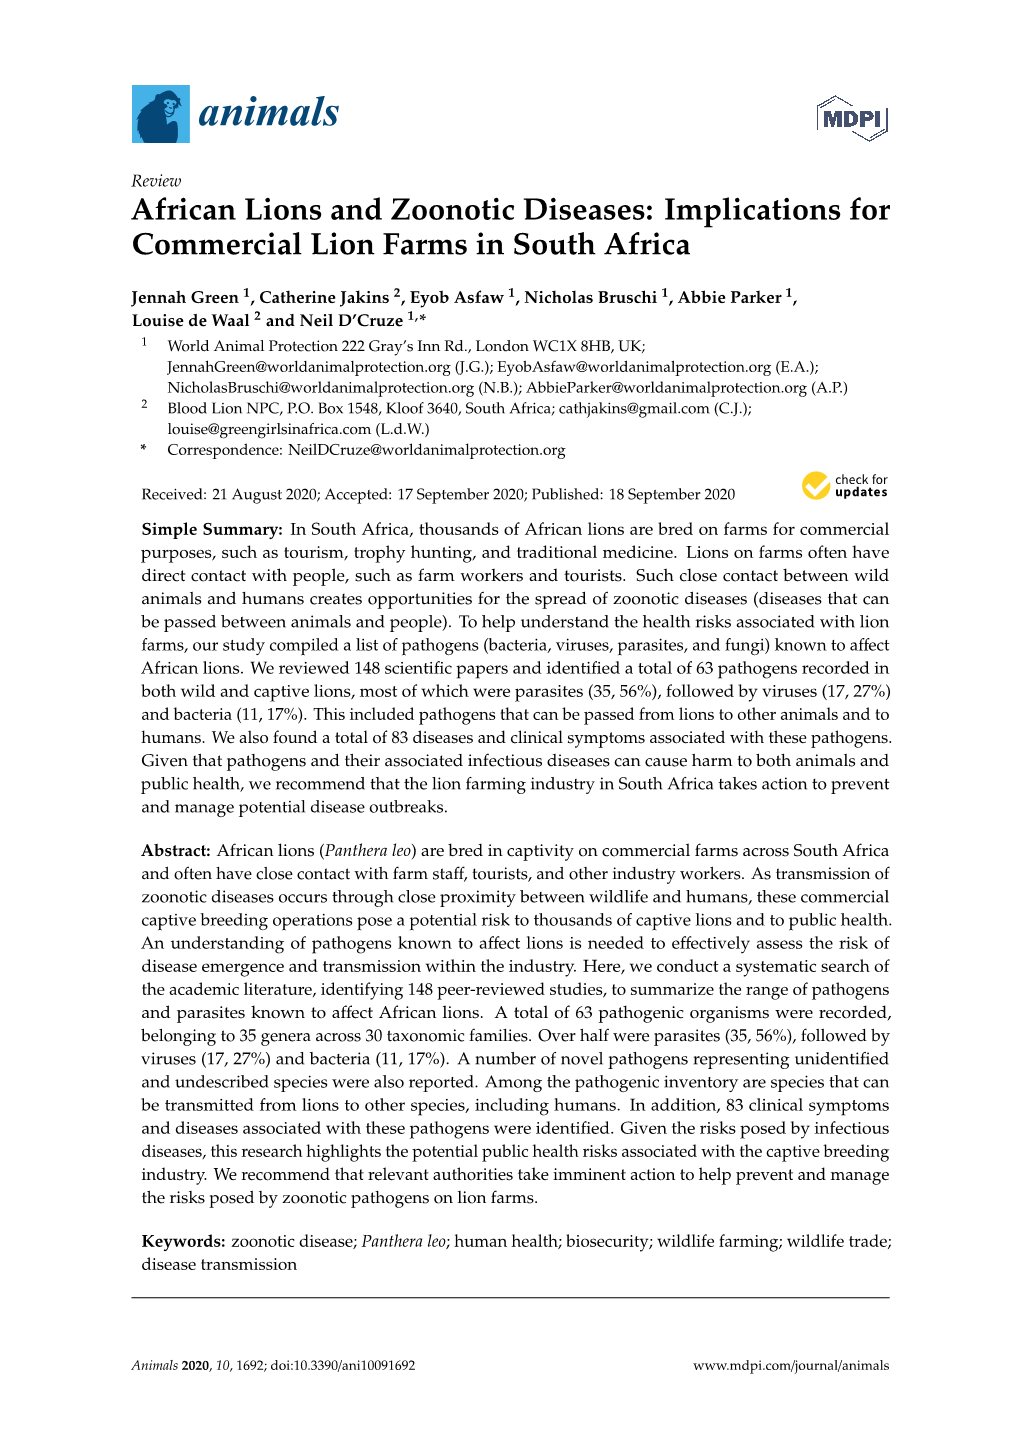 African Lions and Zoonotic Diseases: Implications for Commercial Lion Farms in South Africa